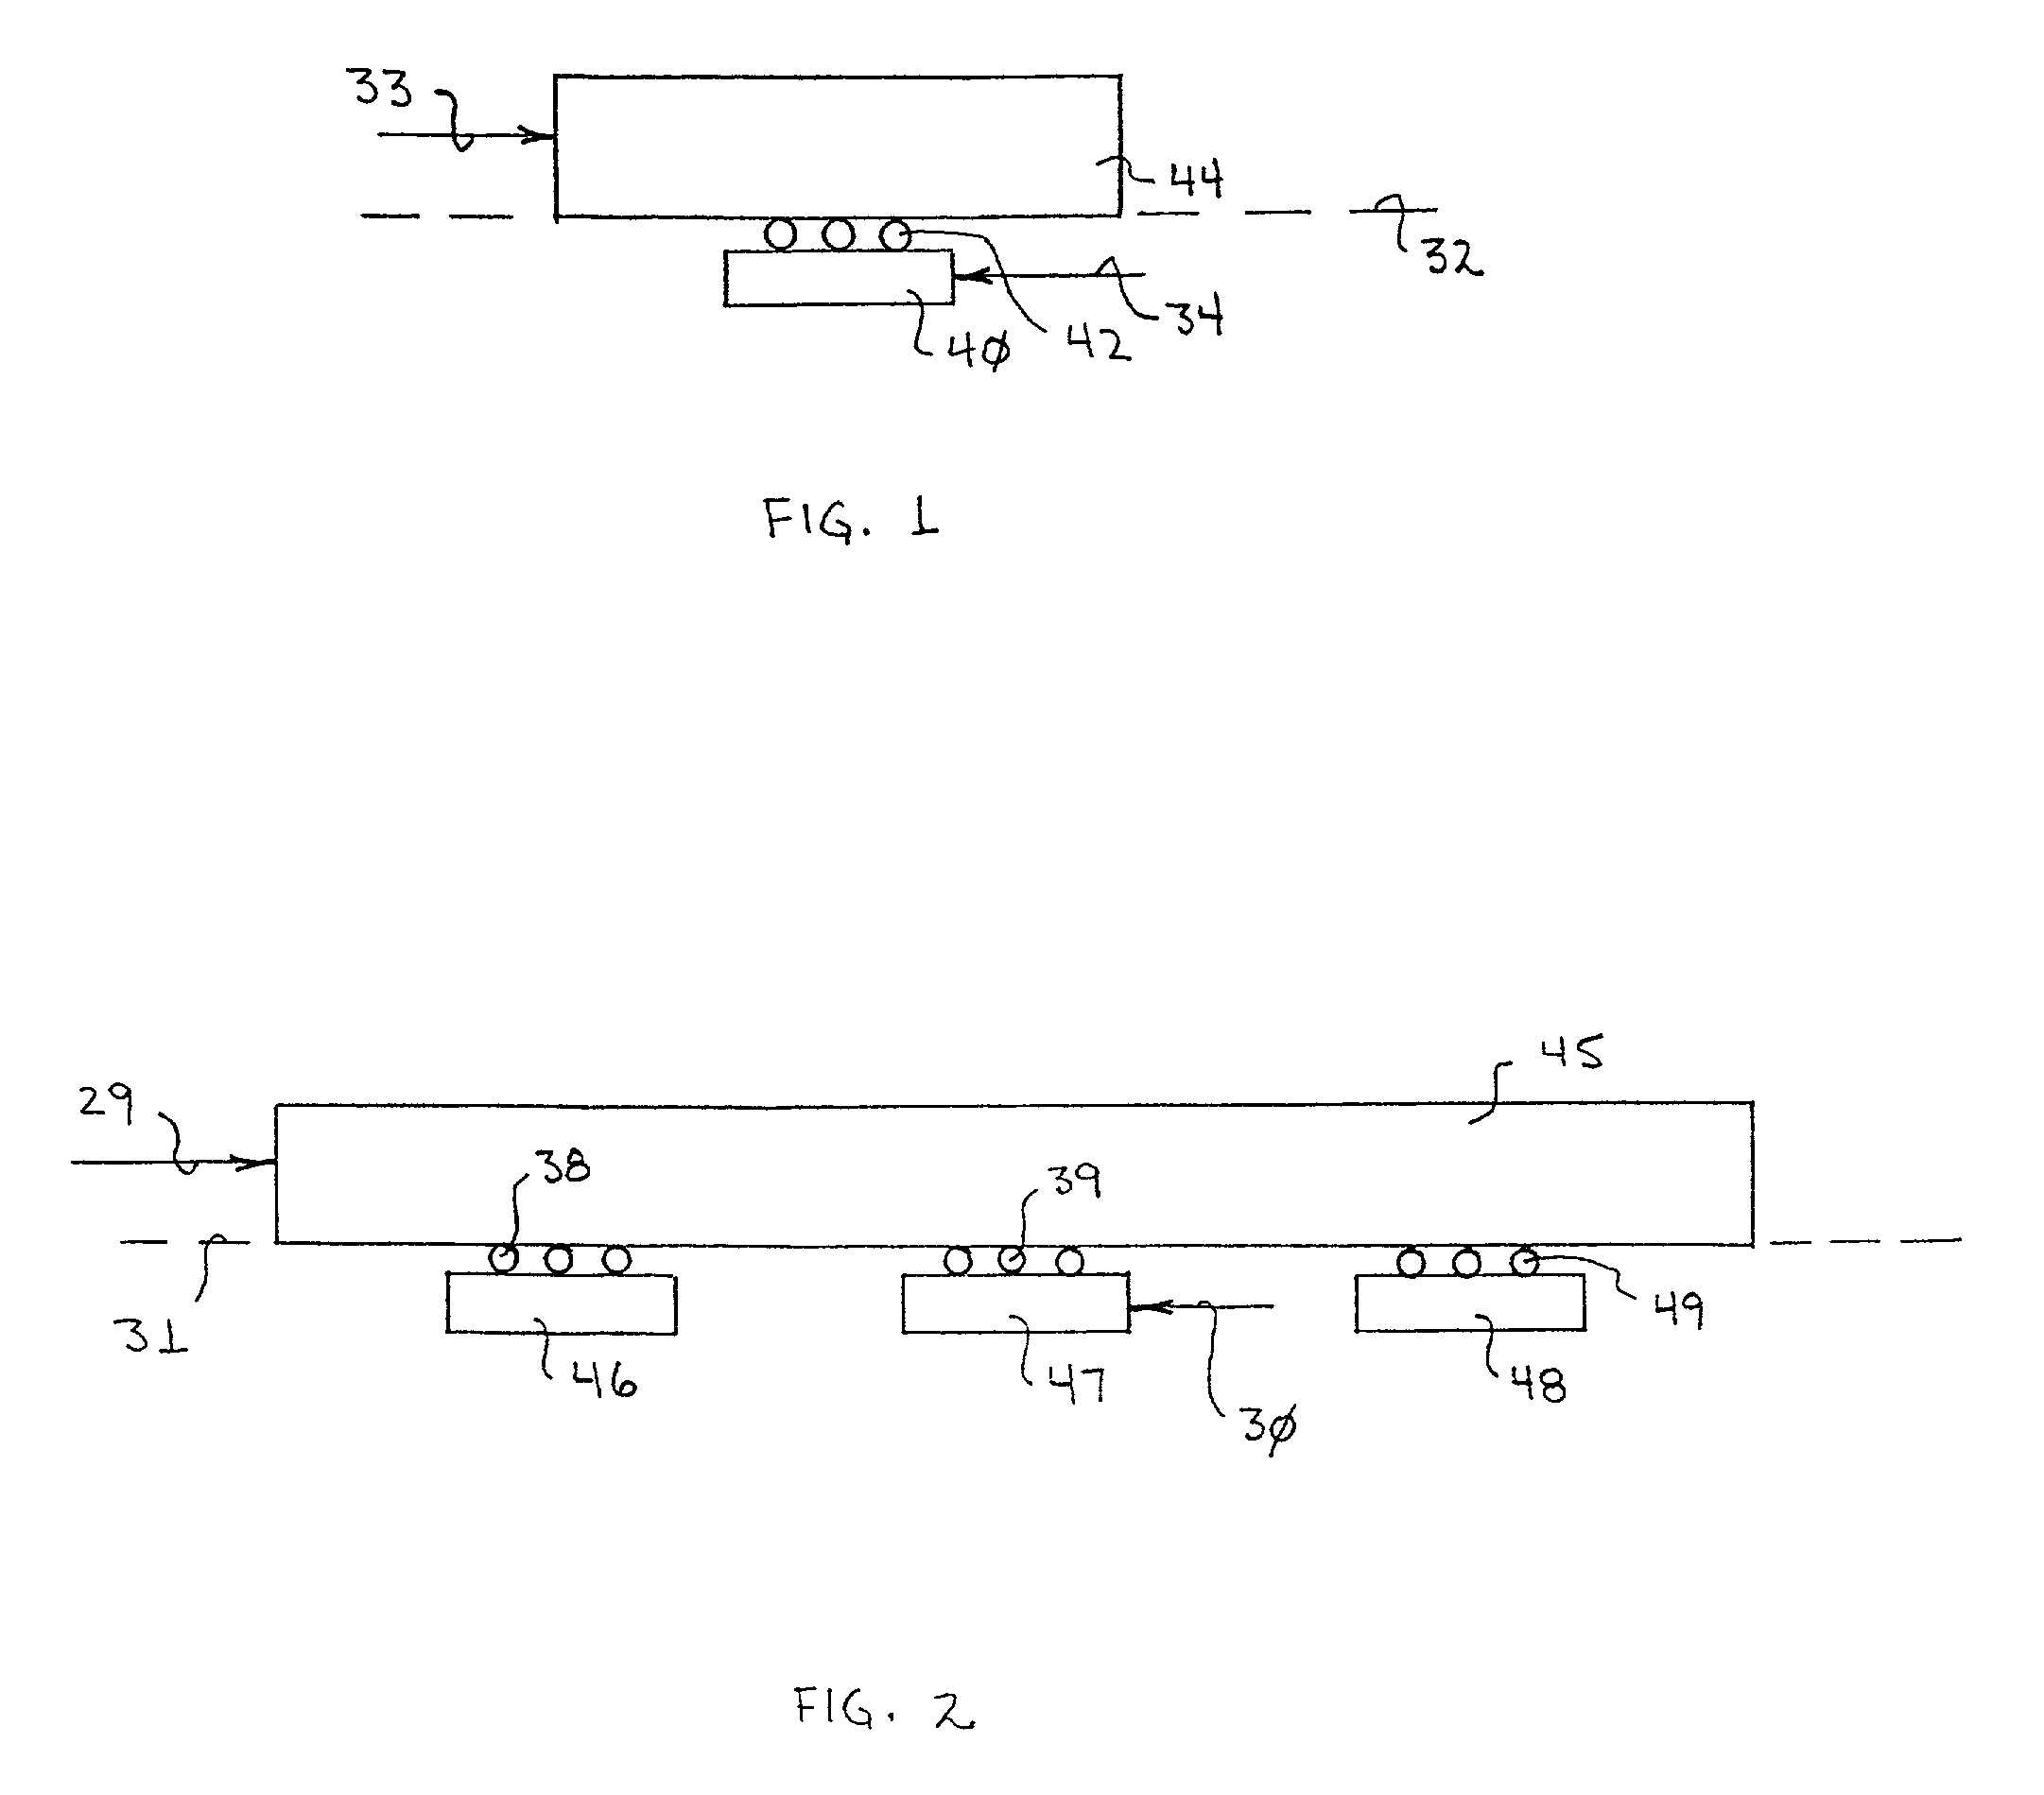 Apparatus and method for non-destructive, low stress removal of soldered electronic components